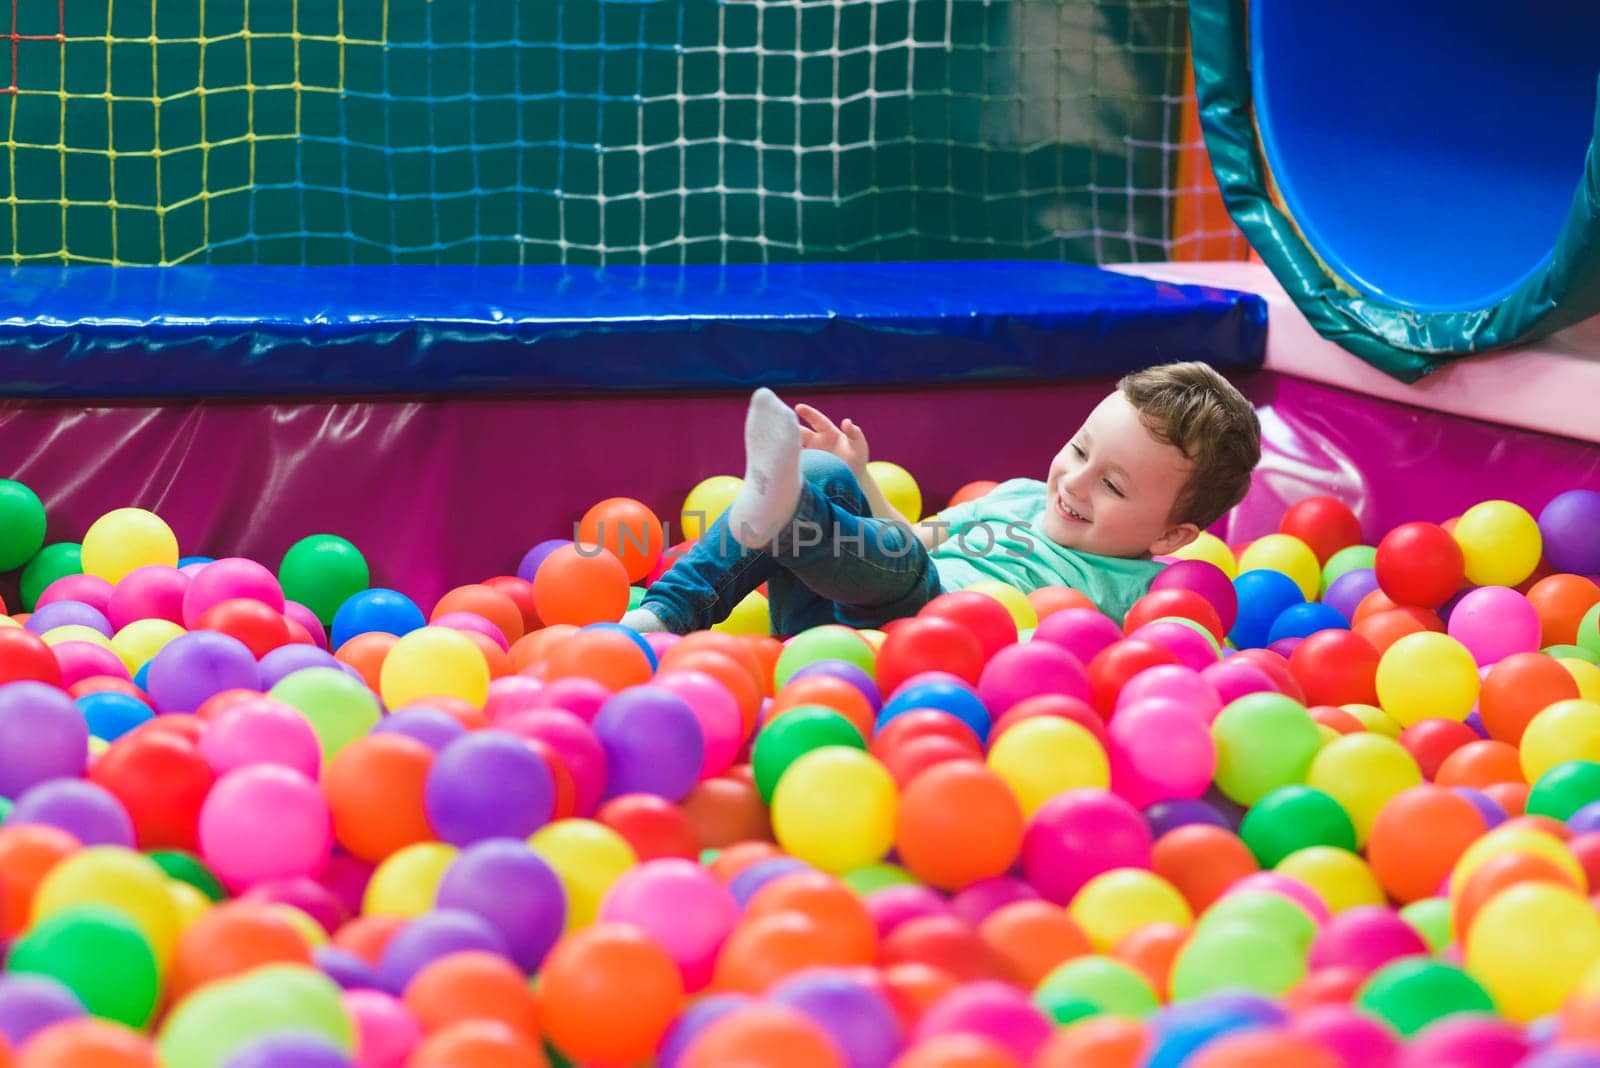 Happy laughing child laughing in an indoor play center. Children playing with colored balls in the playground ball pool. Party.